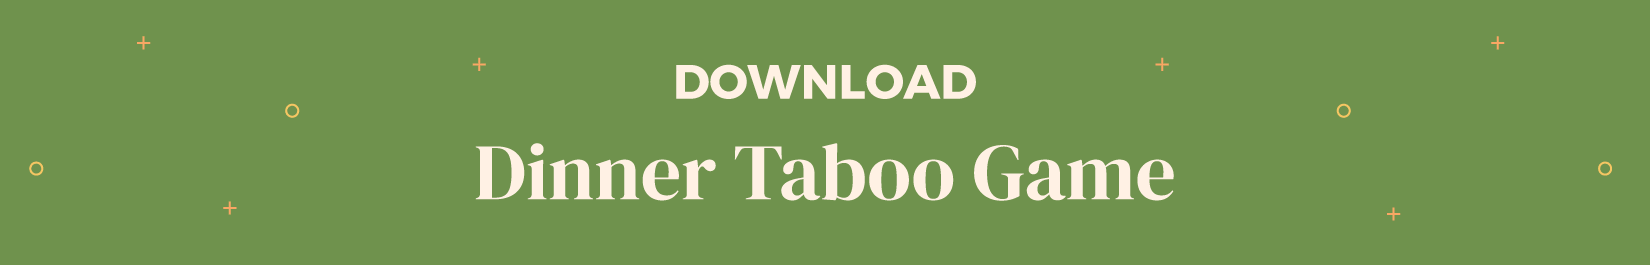 Download button for taboo game.